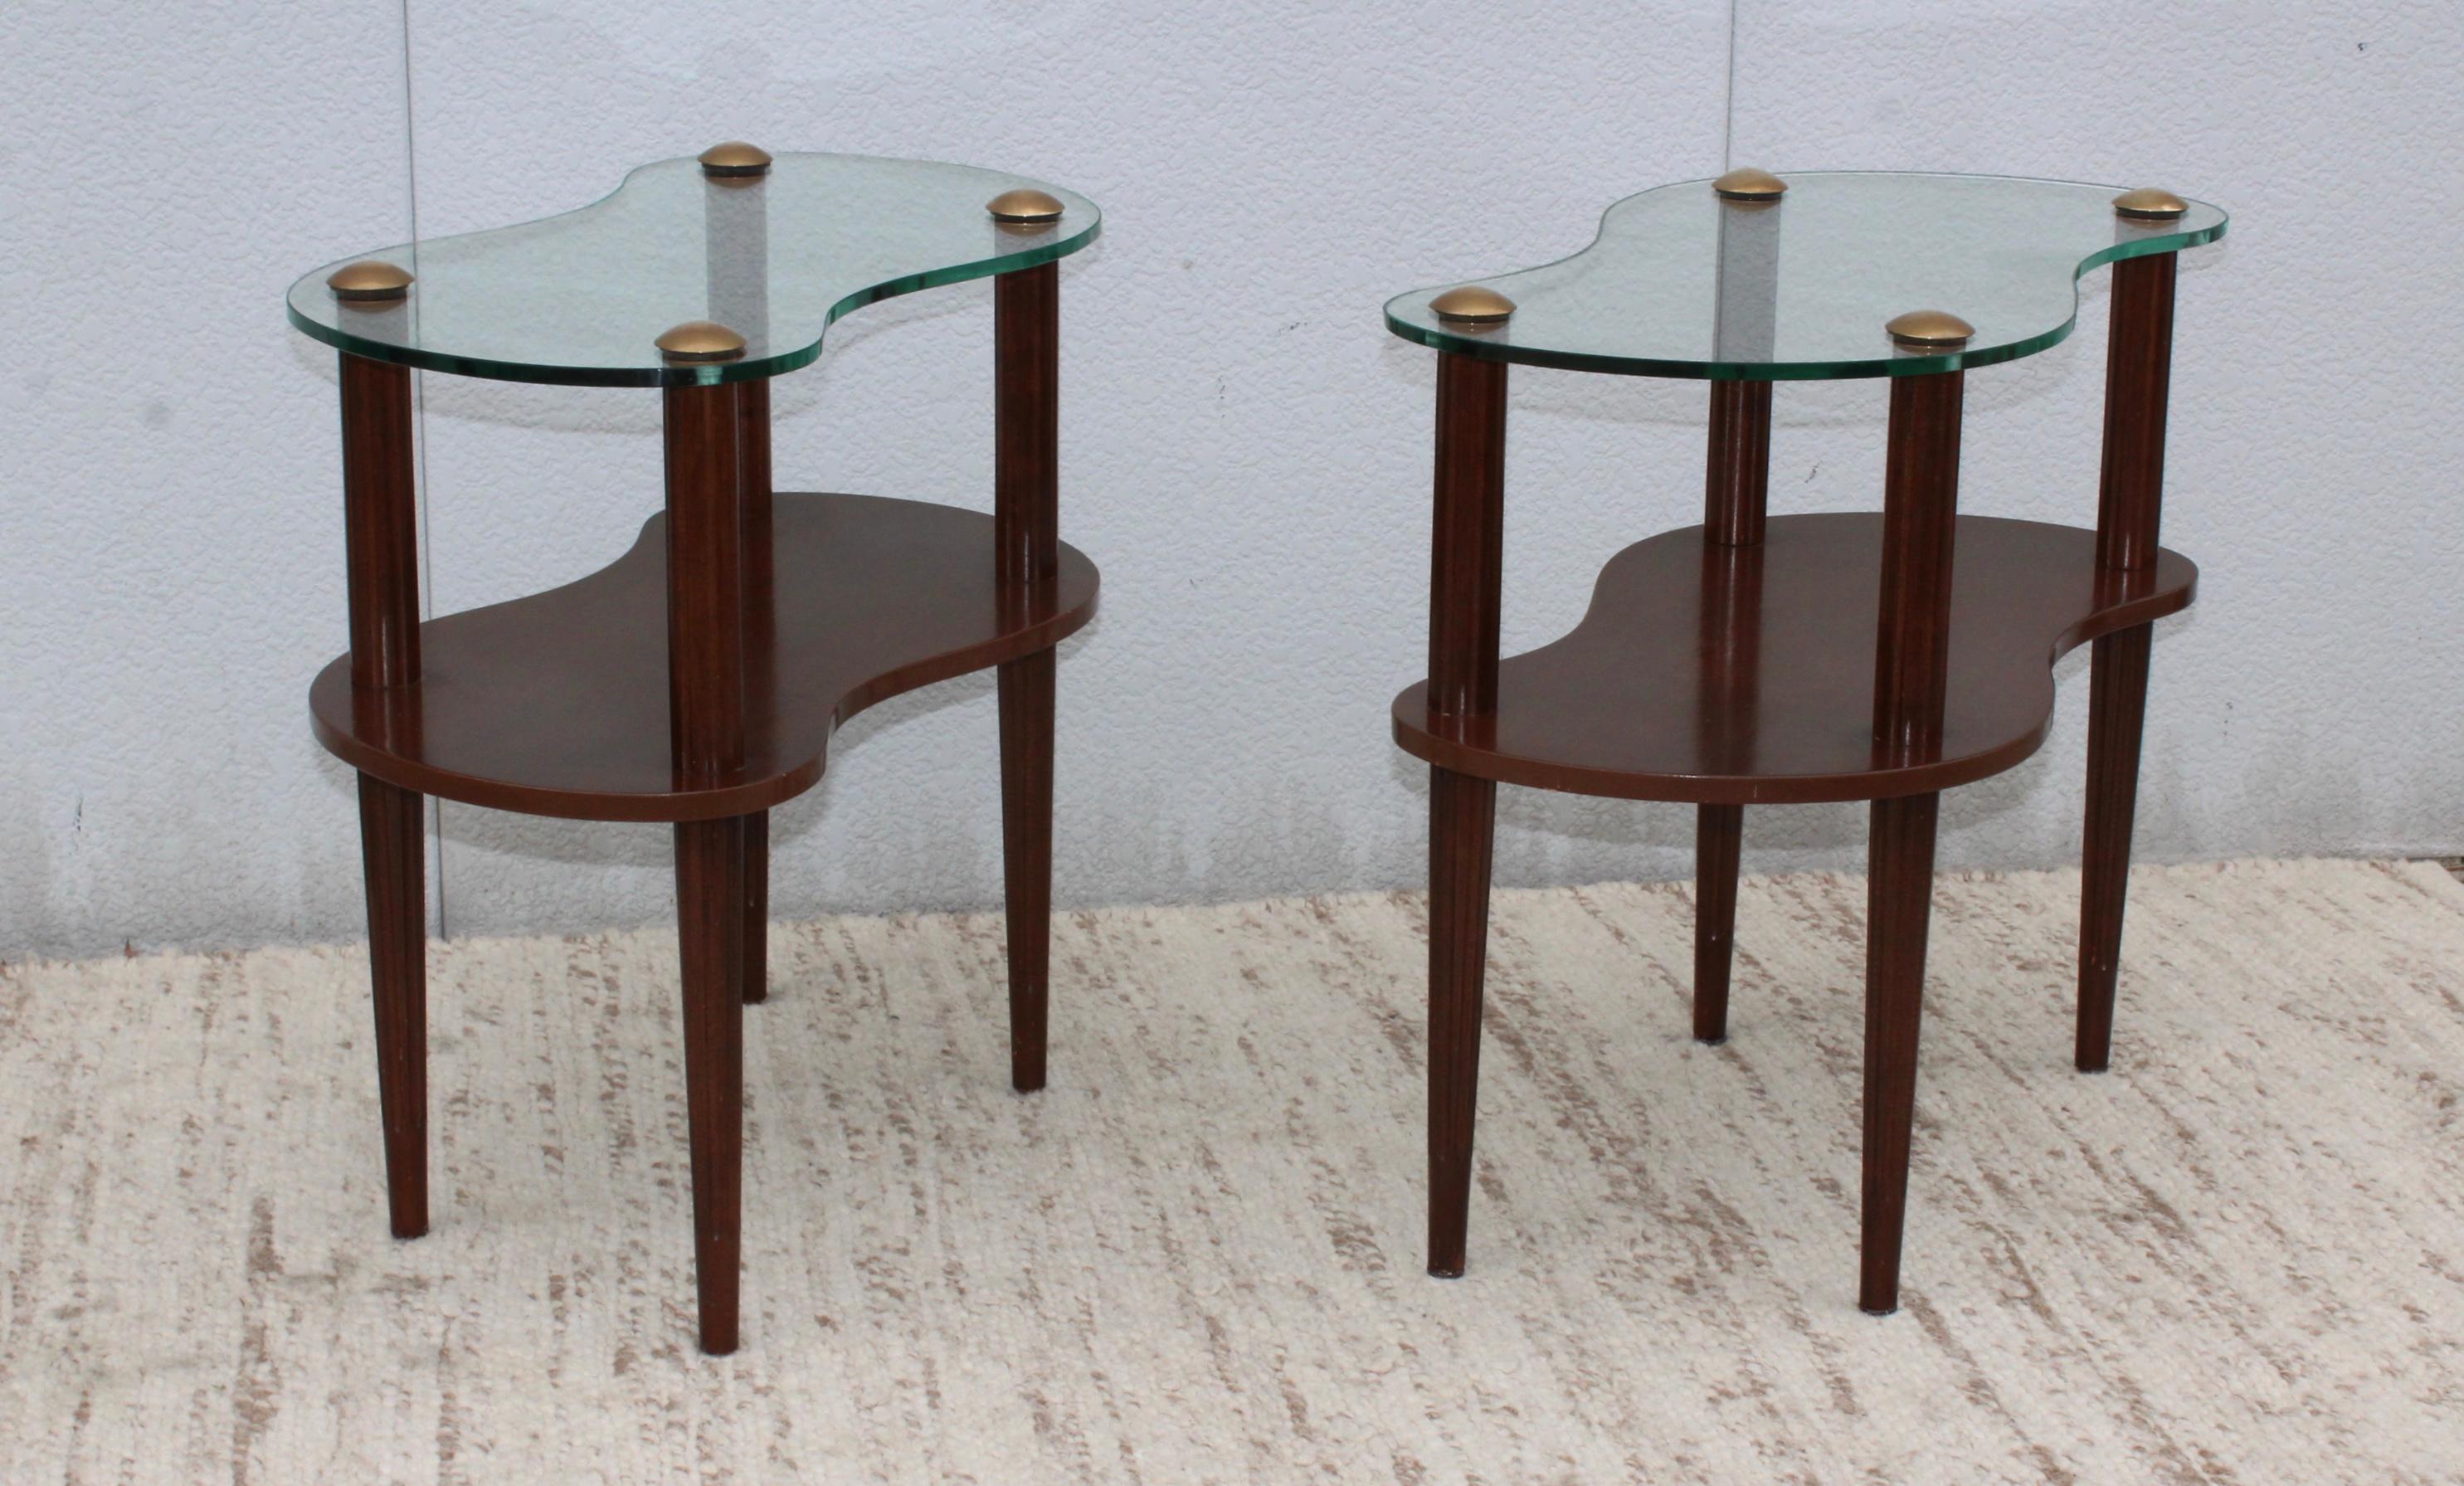 1950s two-tier wood and glass with solid brass caps end tables by Gilbert Rohde.